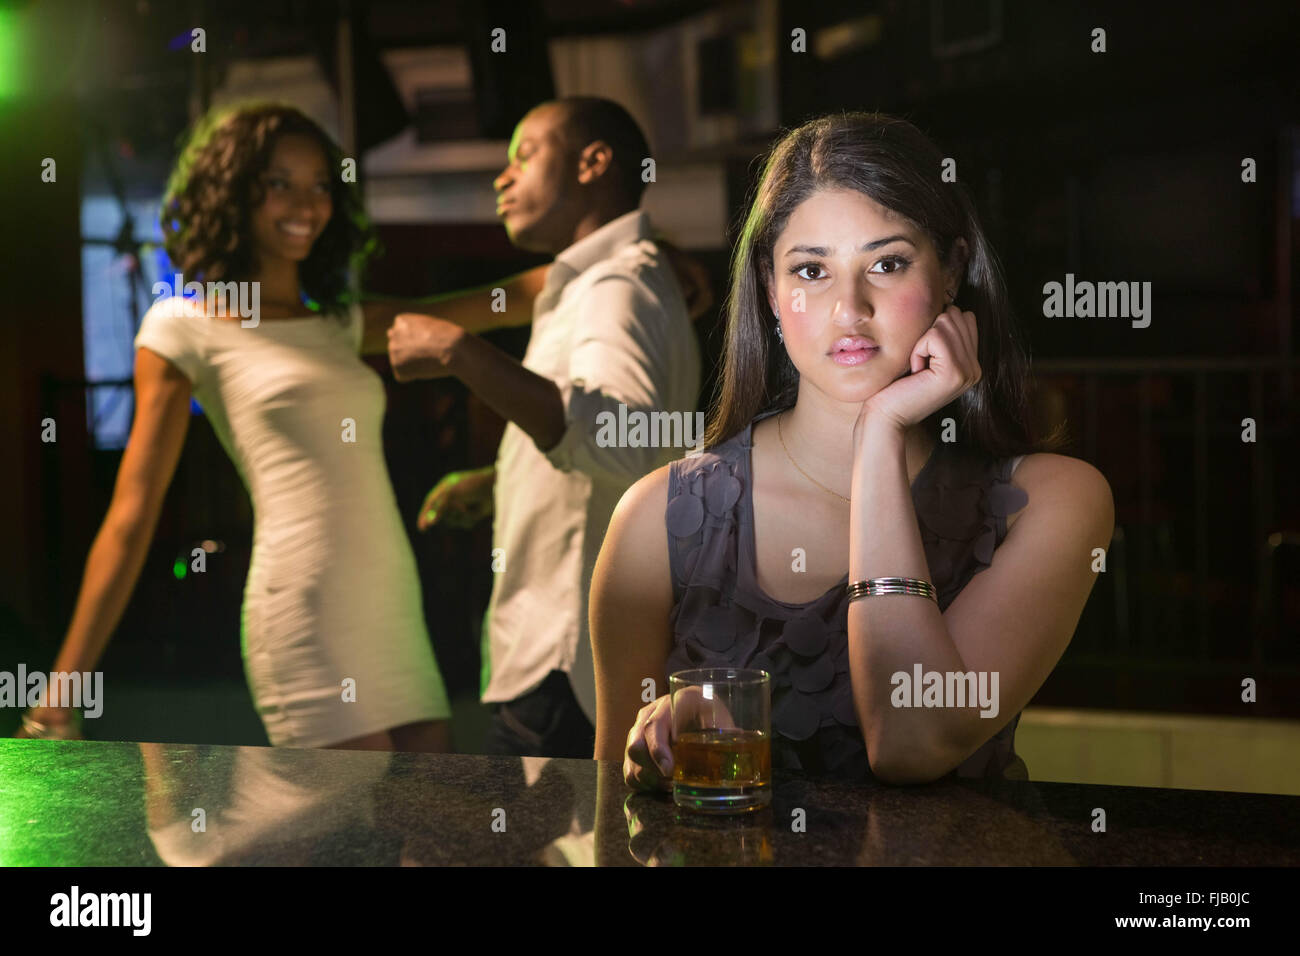 Unhappy woman sitting at bar counter and couple dancing behind her Stock Photo